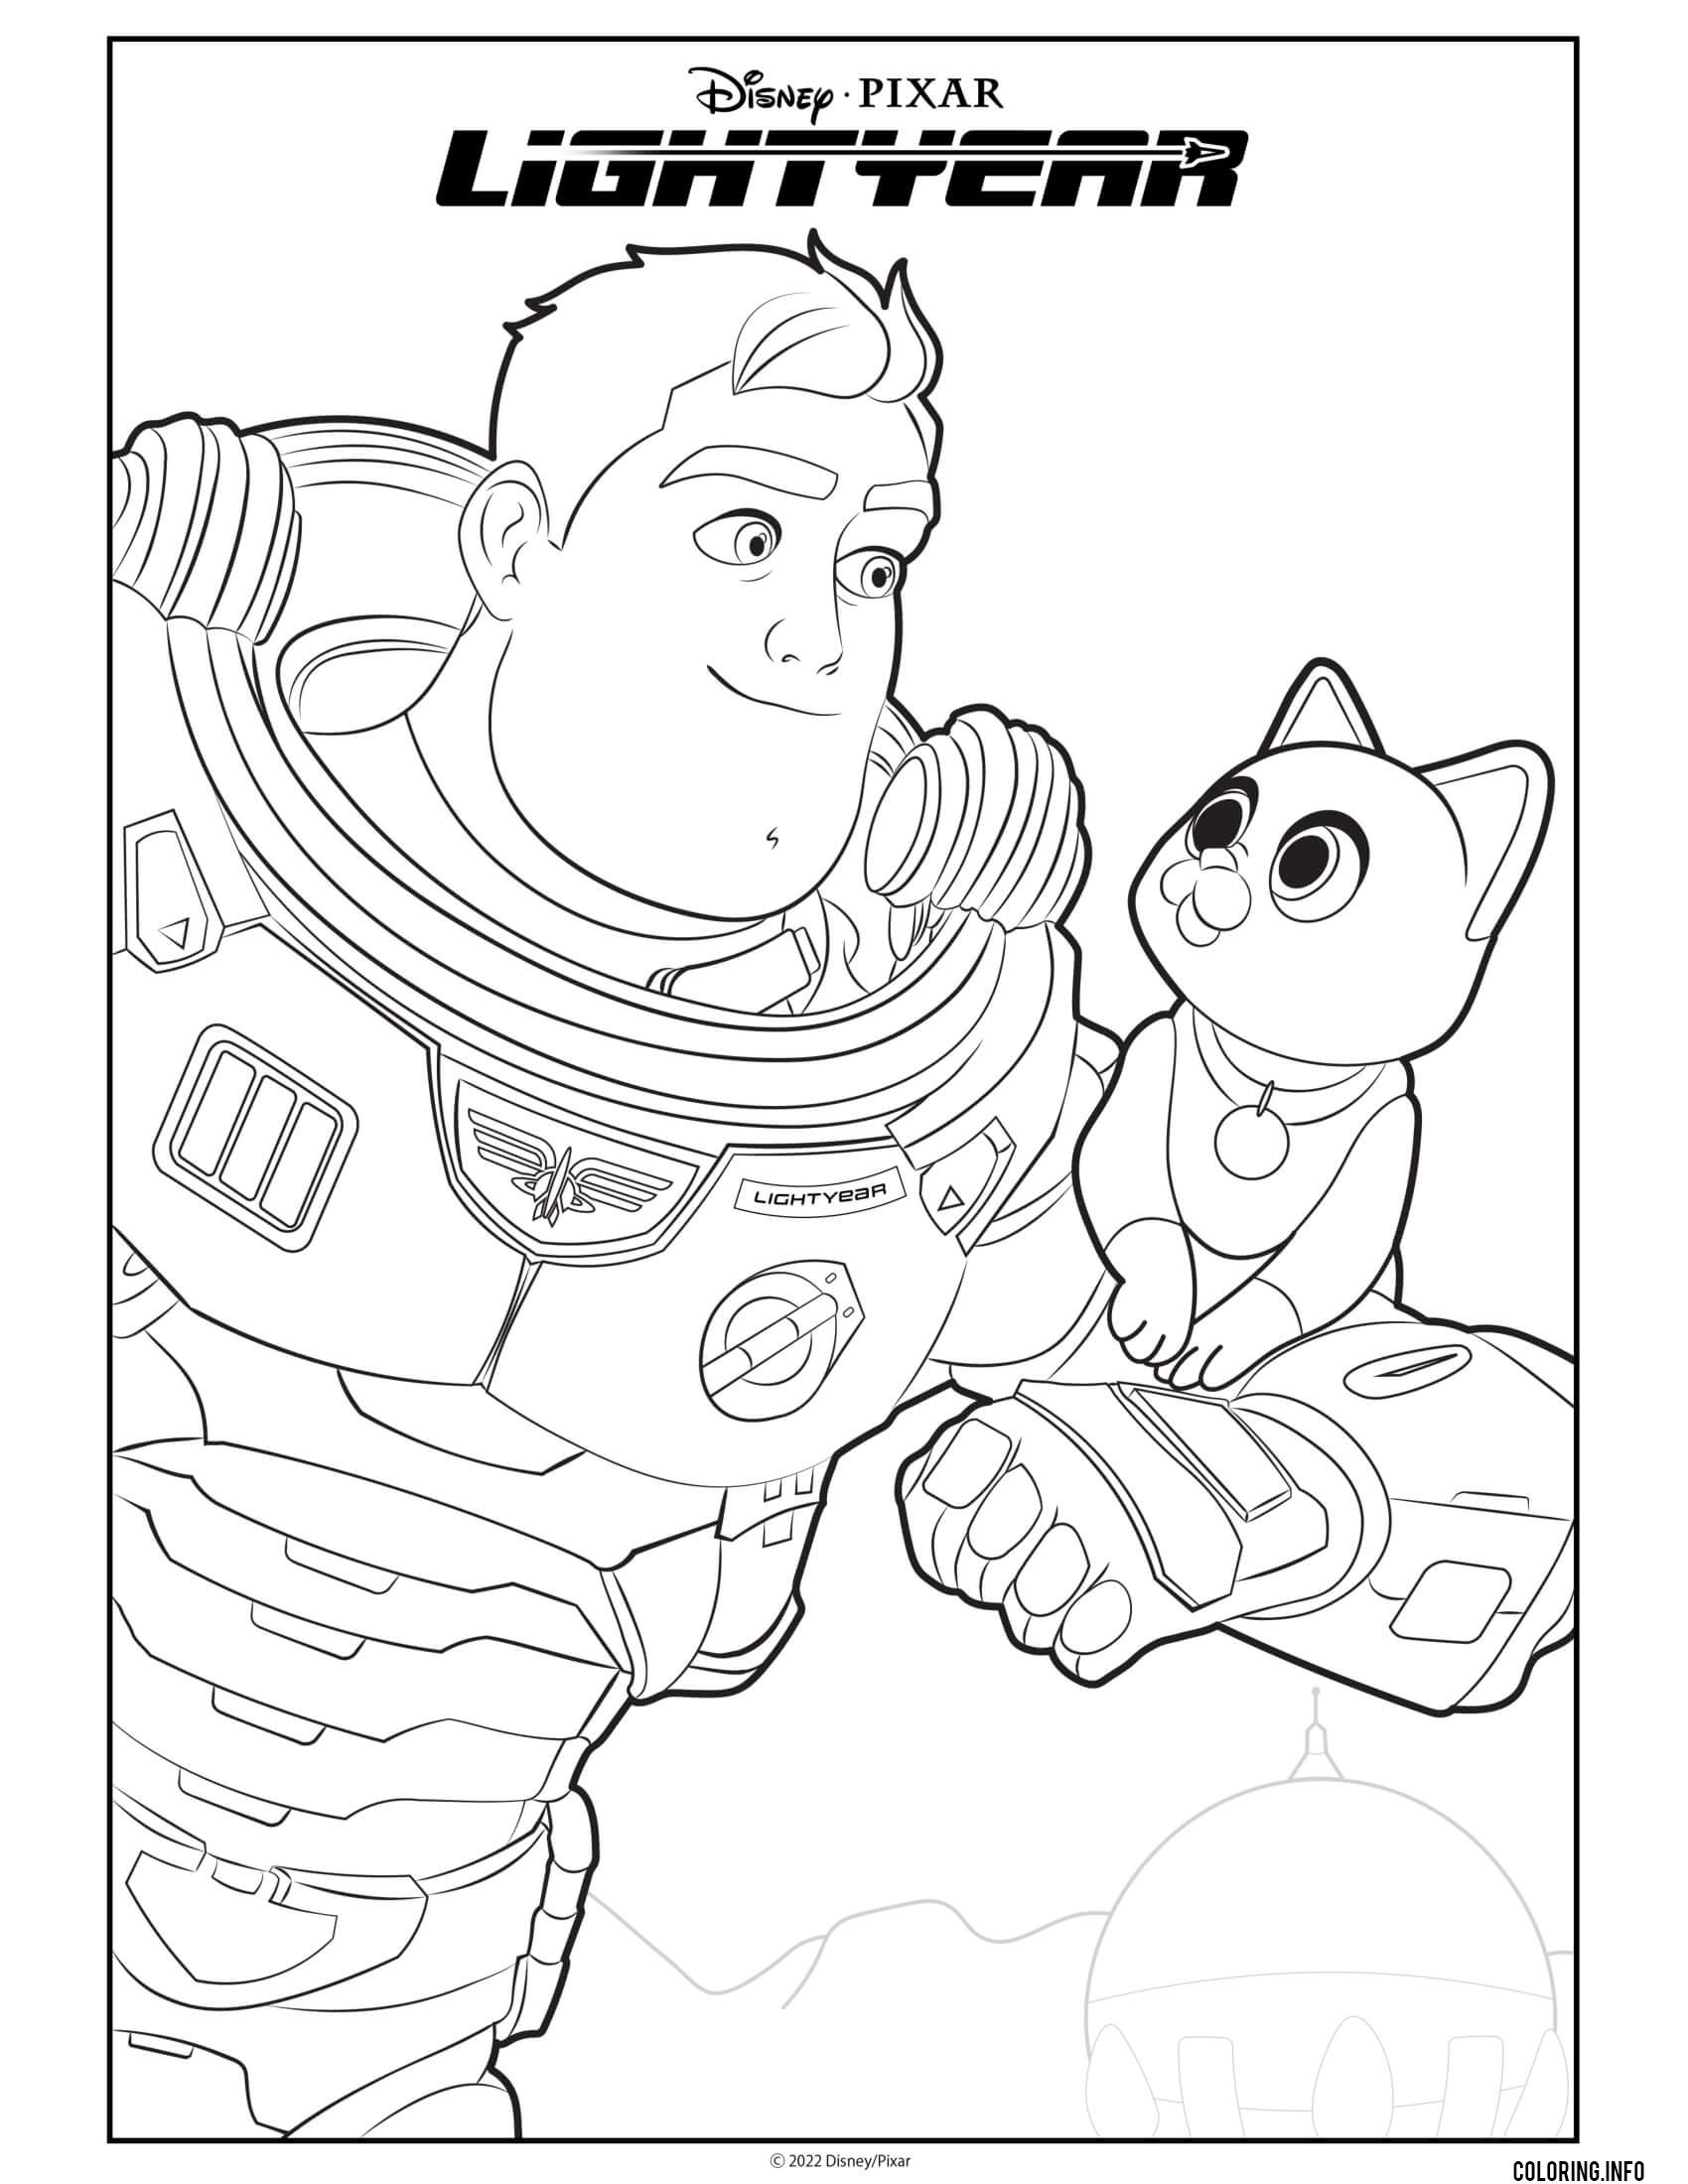 Buzz Lightyear Personal Companion Sox A Robotic Cat coloring